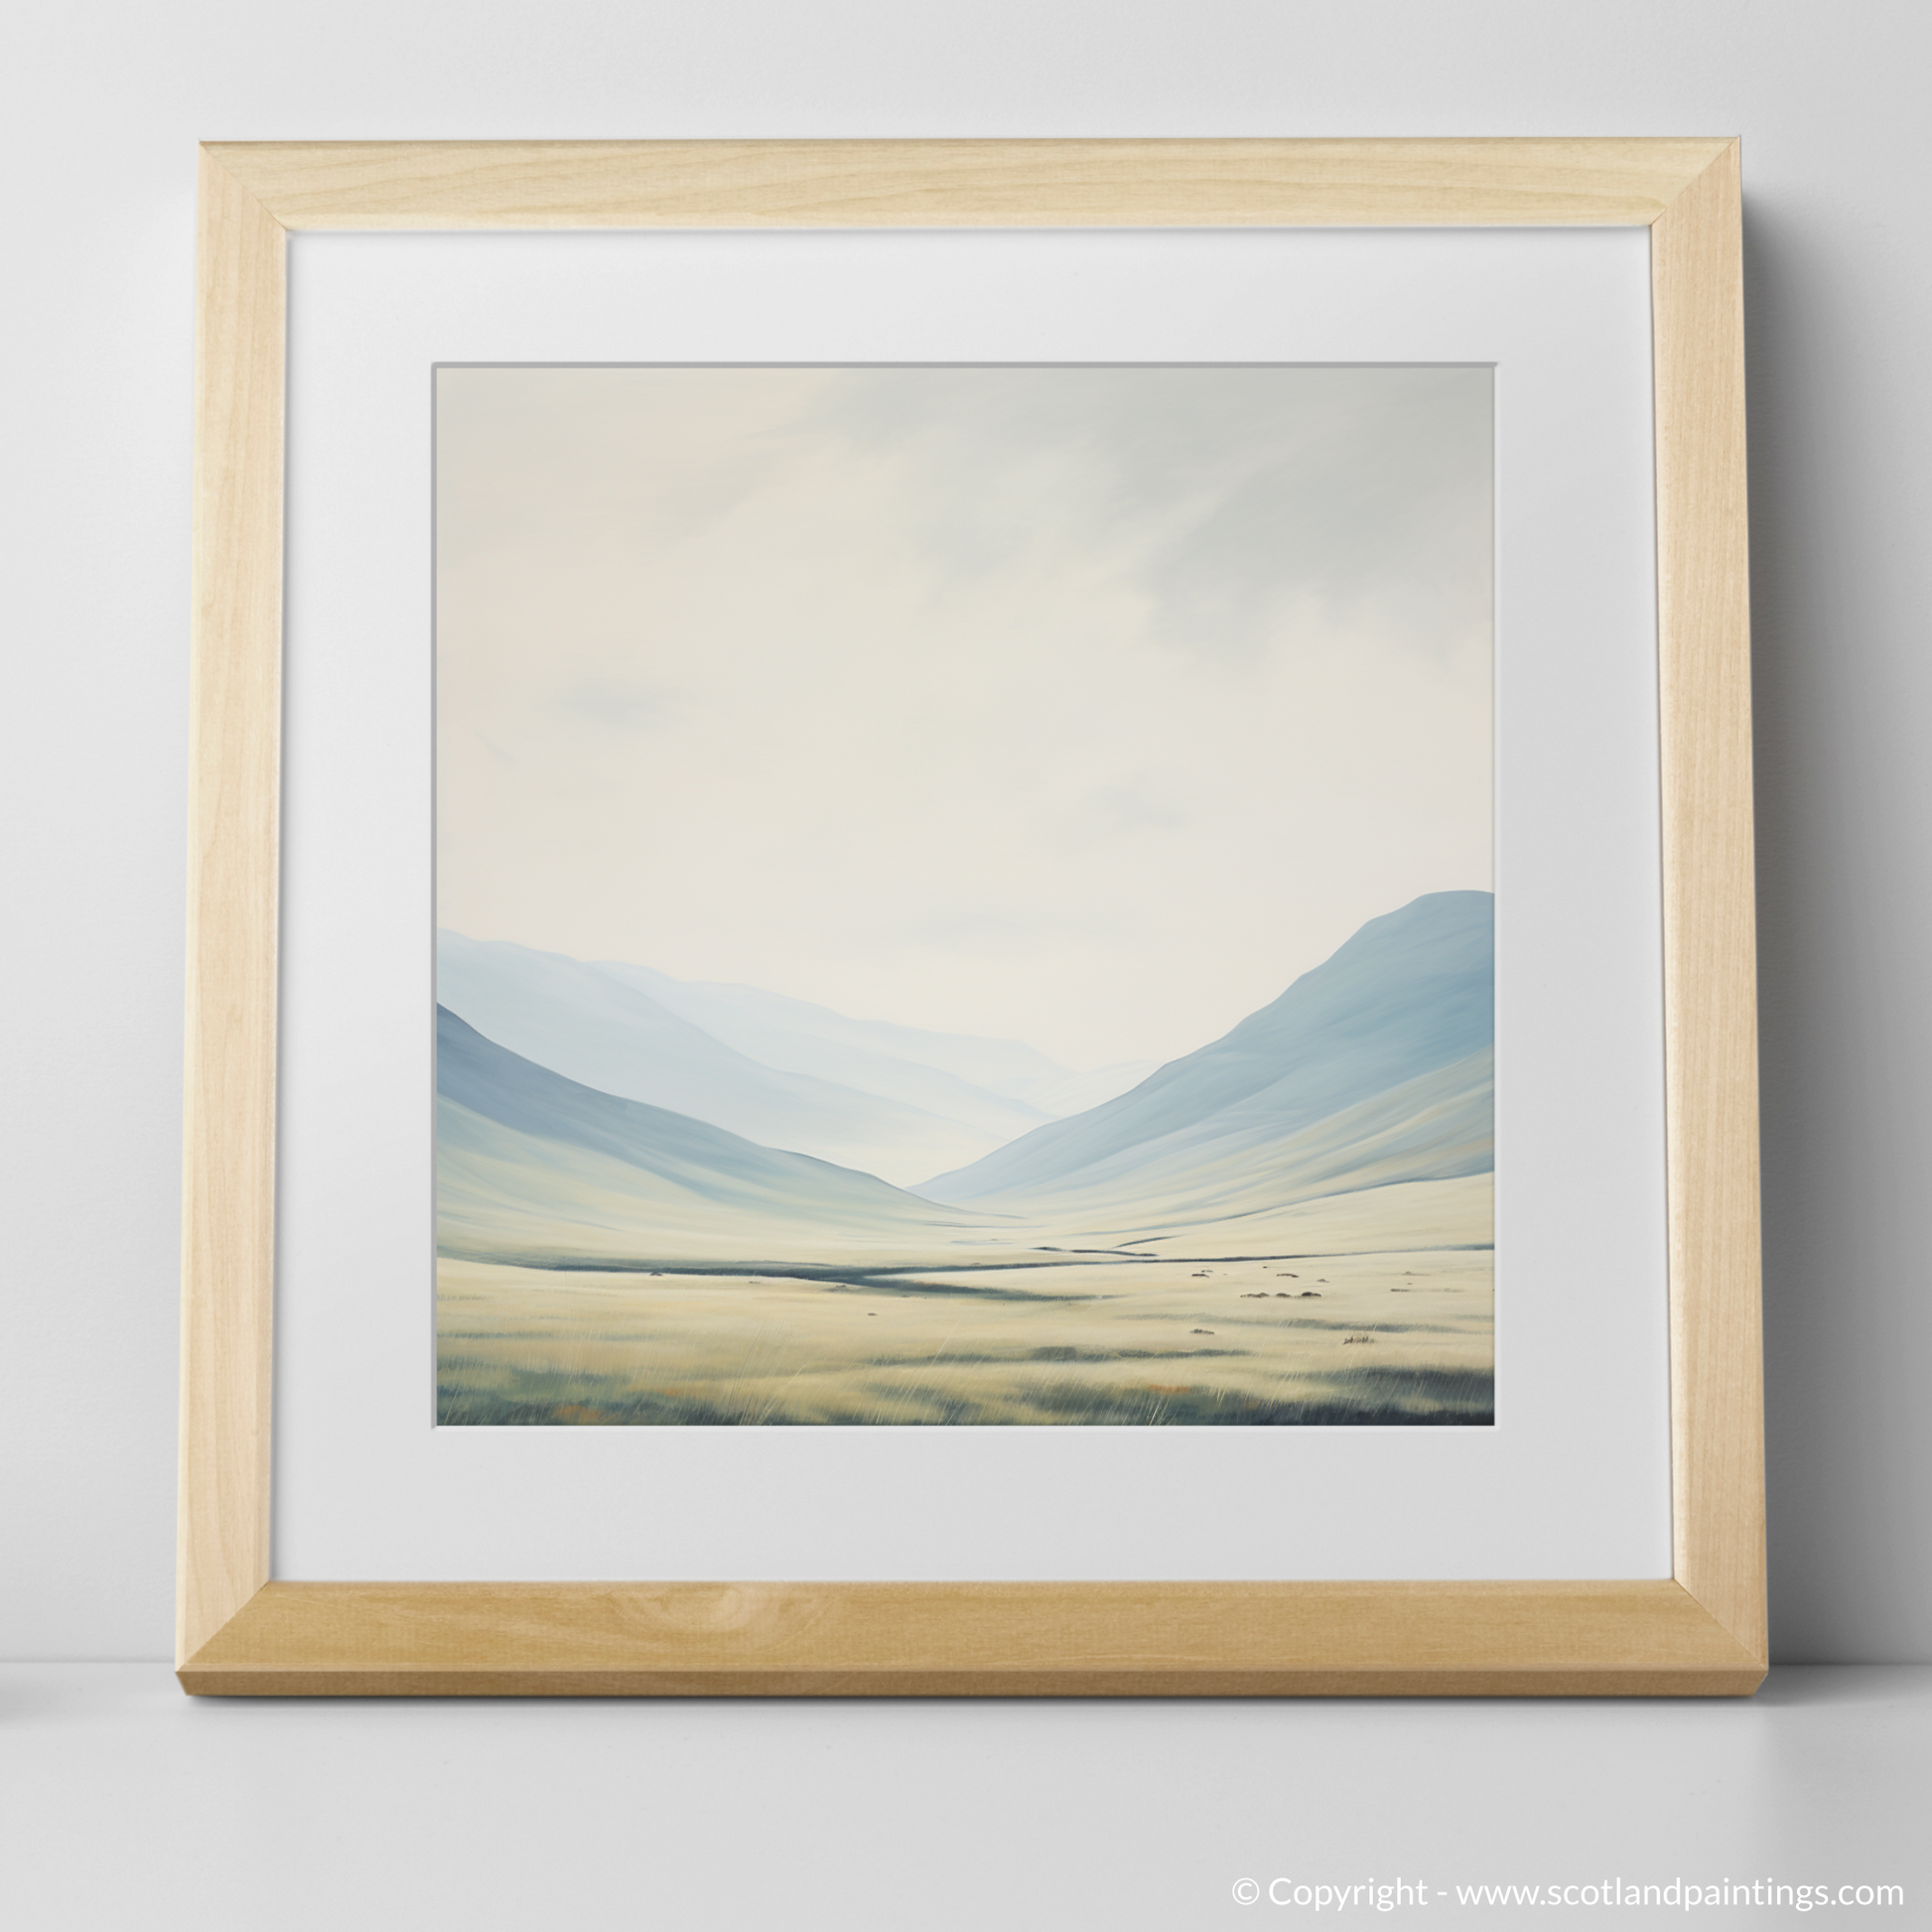 Art Print of The Cairnwell with a natural frame